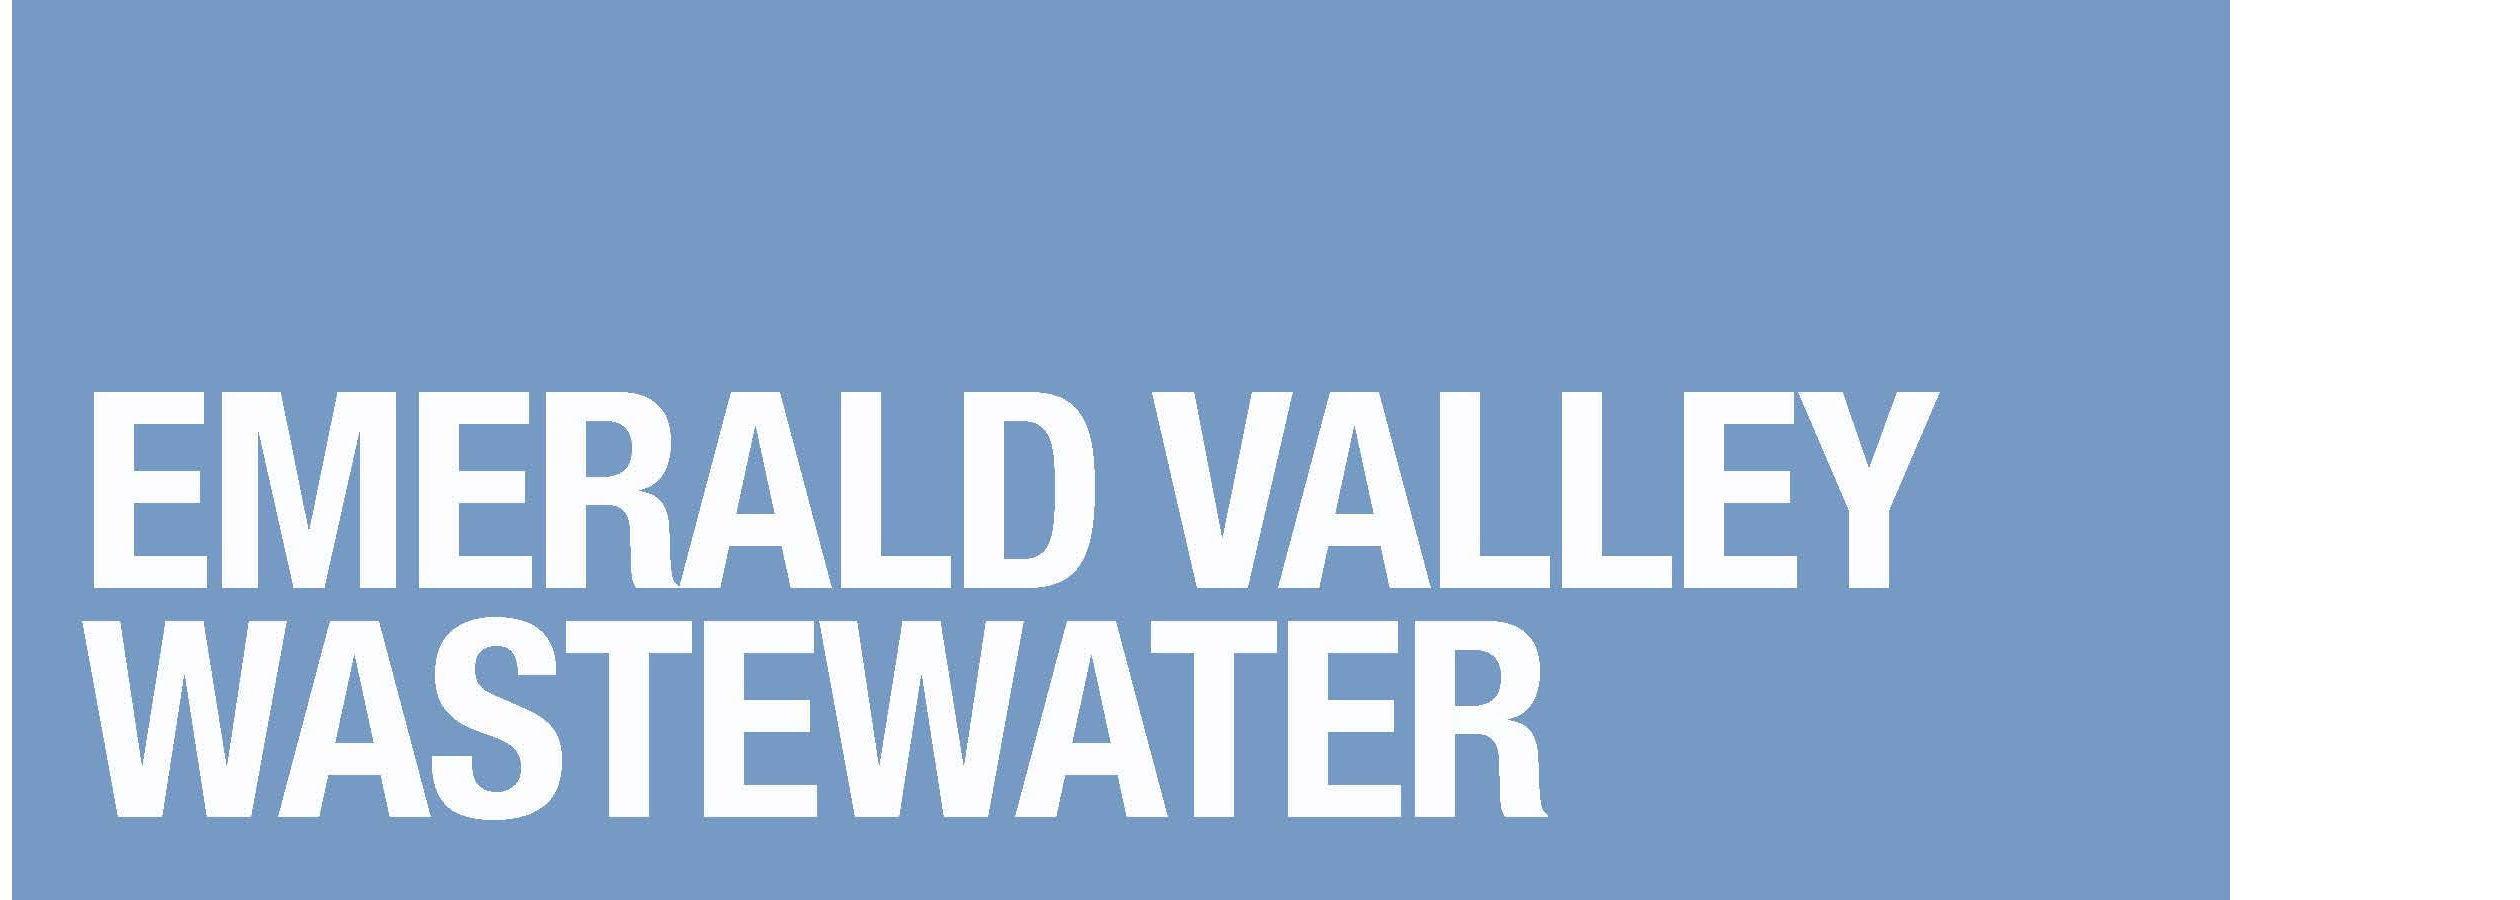 Emerald Valley Wastewater Company